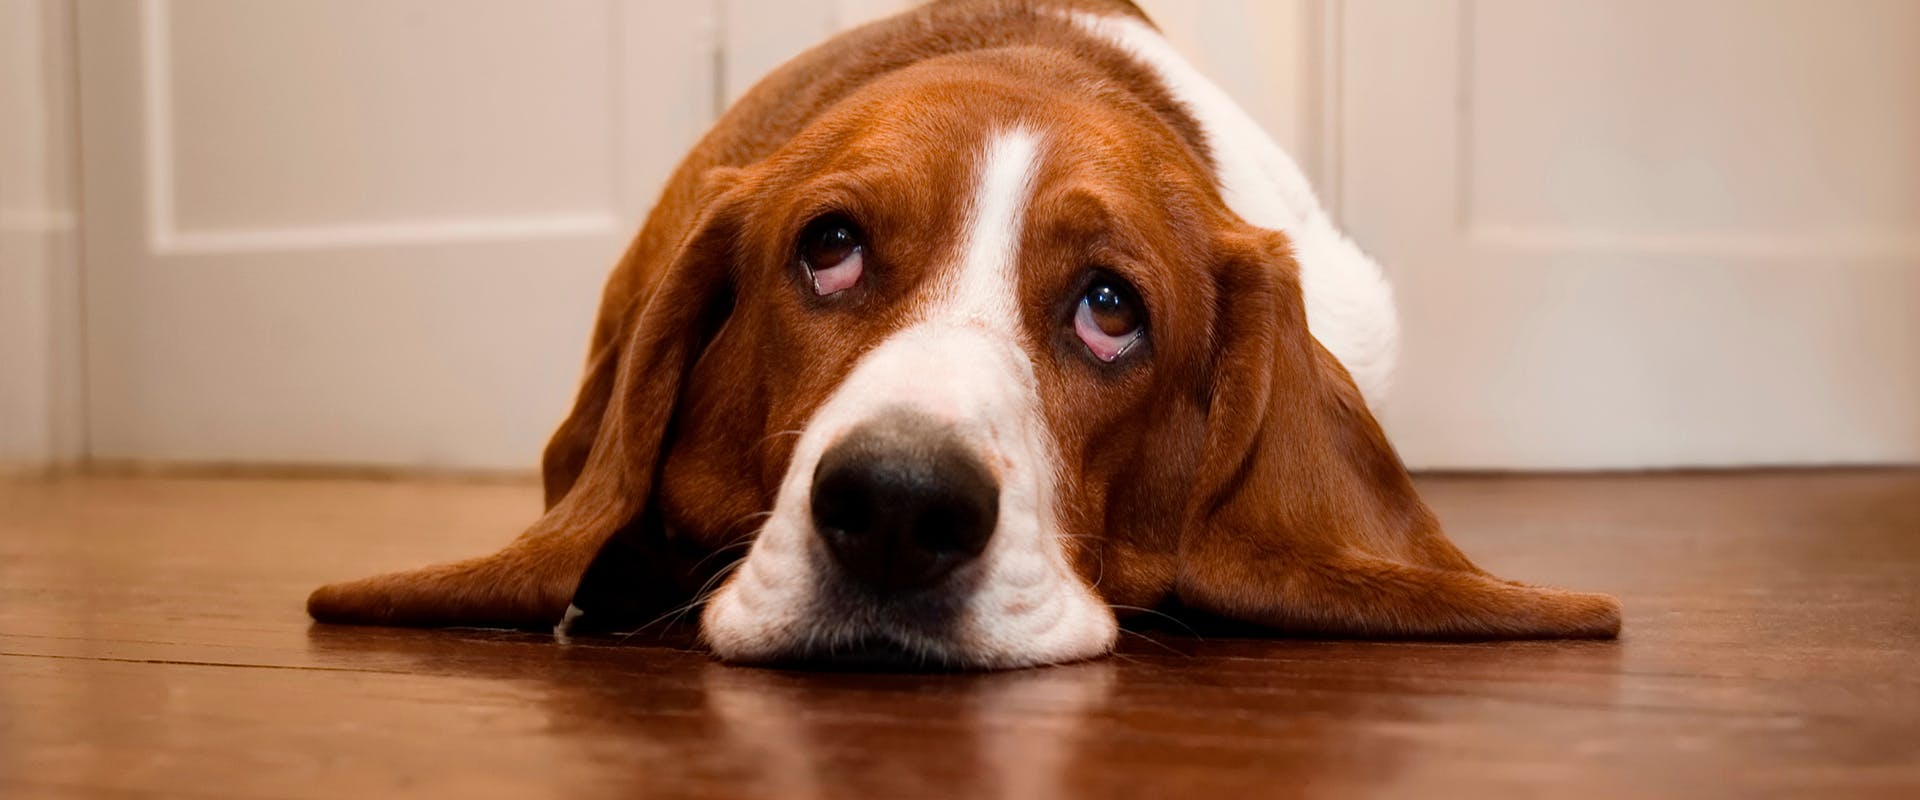 A melancholy looking Basset Hound dog laying down, his head and ears resting on the floor